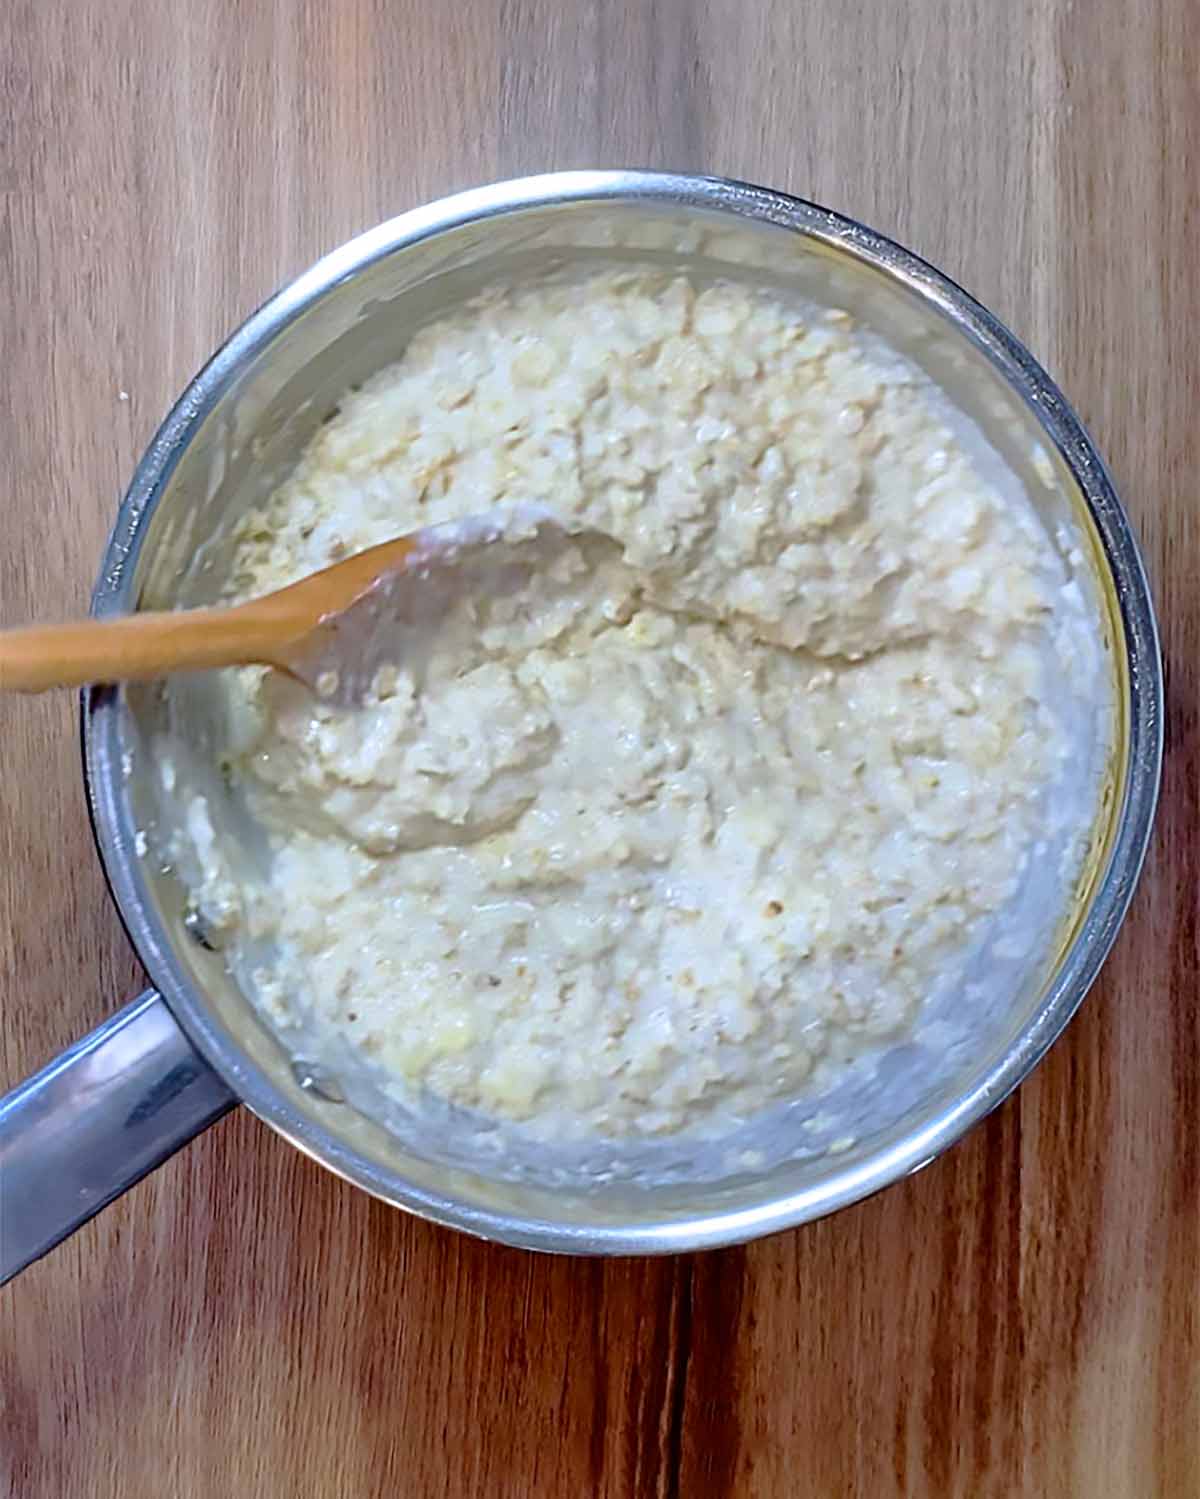 A saucepan of porridge with a wooden spoon mixing it.